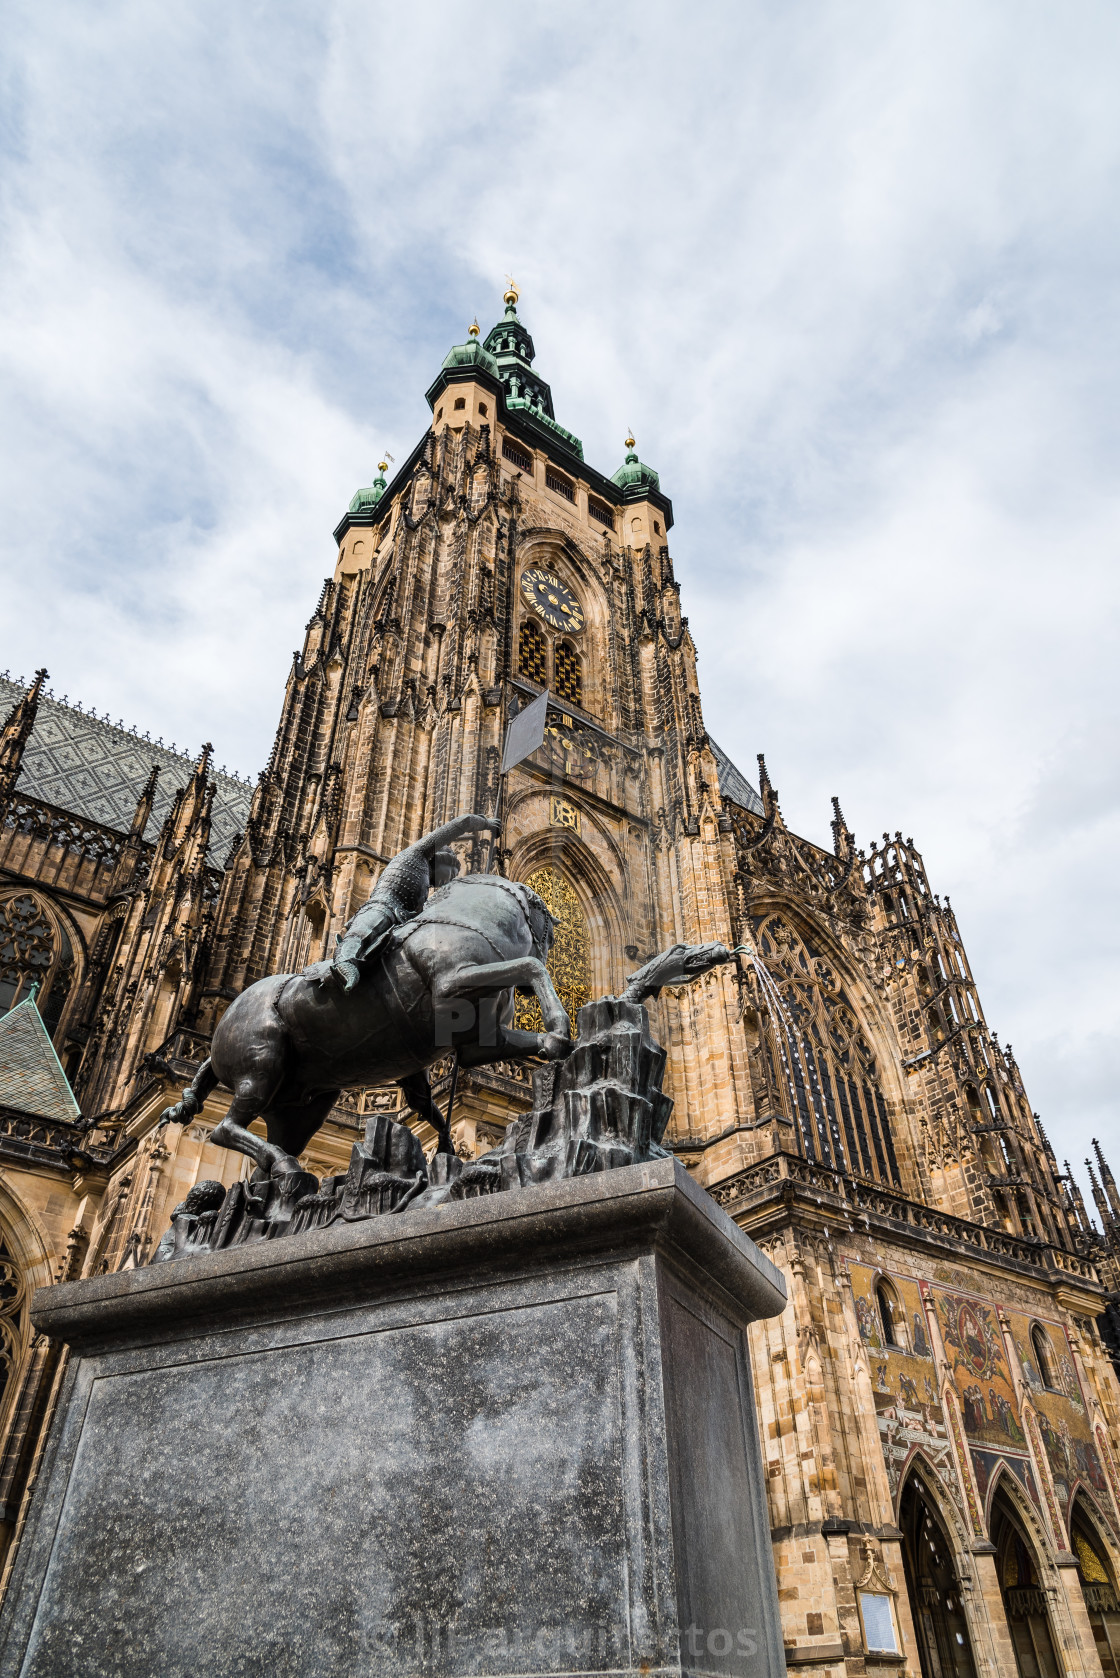 "Outdoor view of St. Vitus Cathedral in Prague" stock image